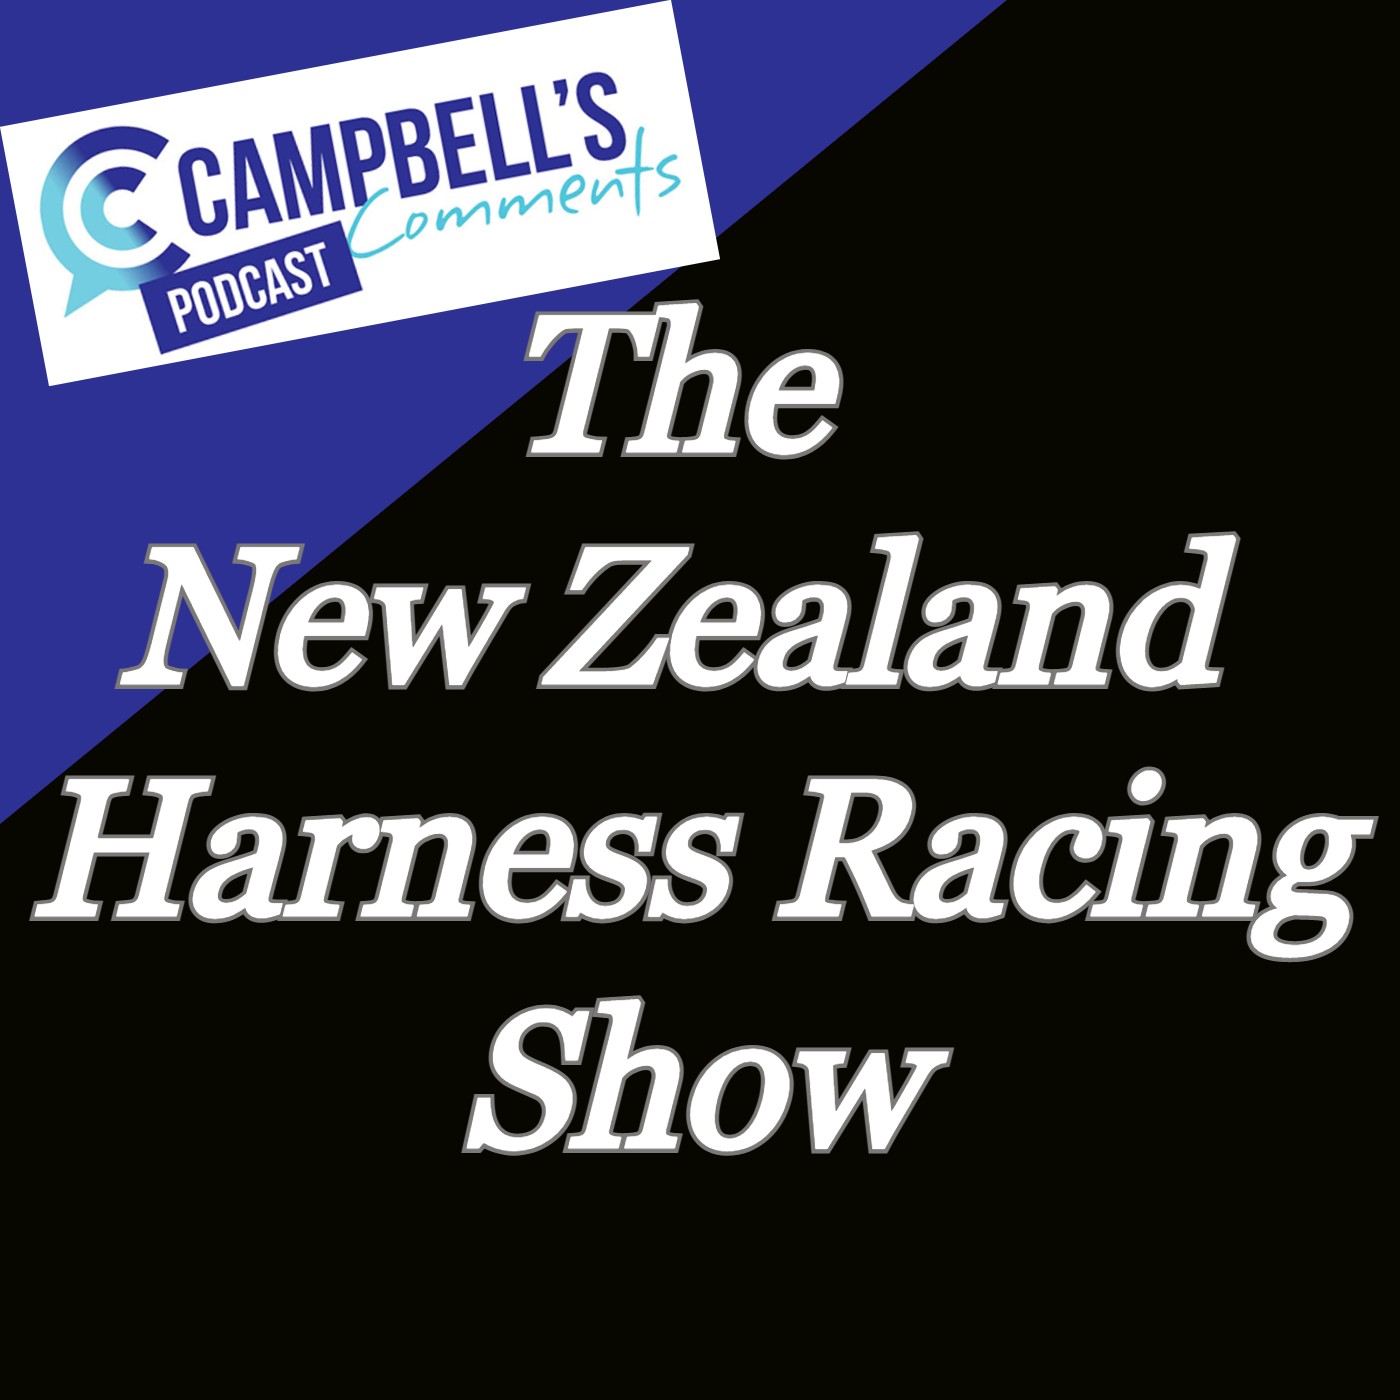 You are currently viewing 211: Campbells Comments, The New Zealand Harness Racing Show